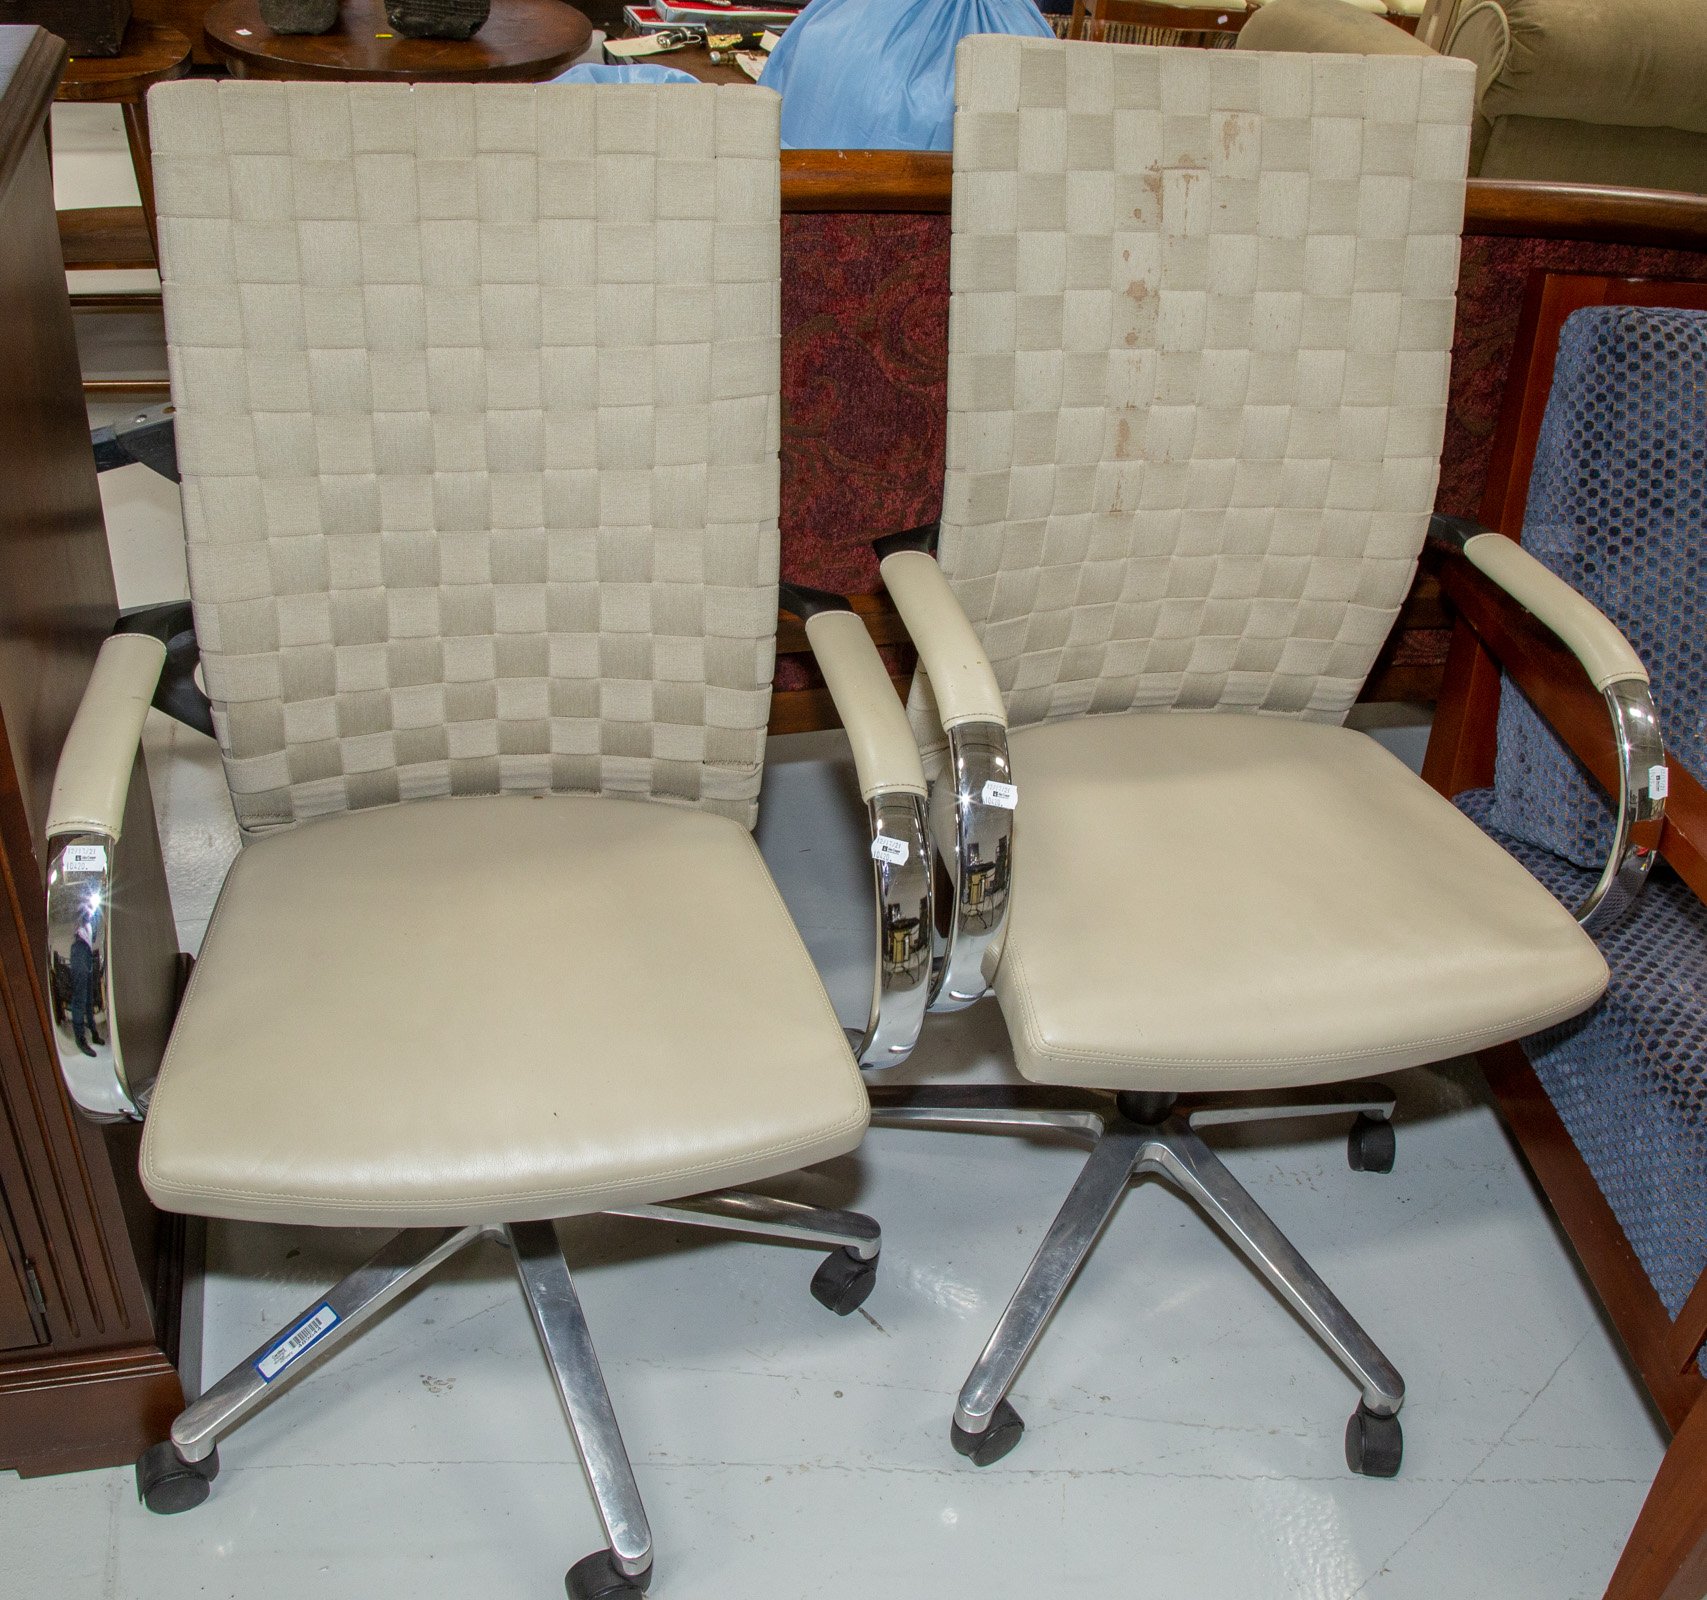 A PAIR OF MODERN DESK CHAIRS With chrome